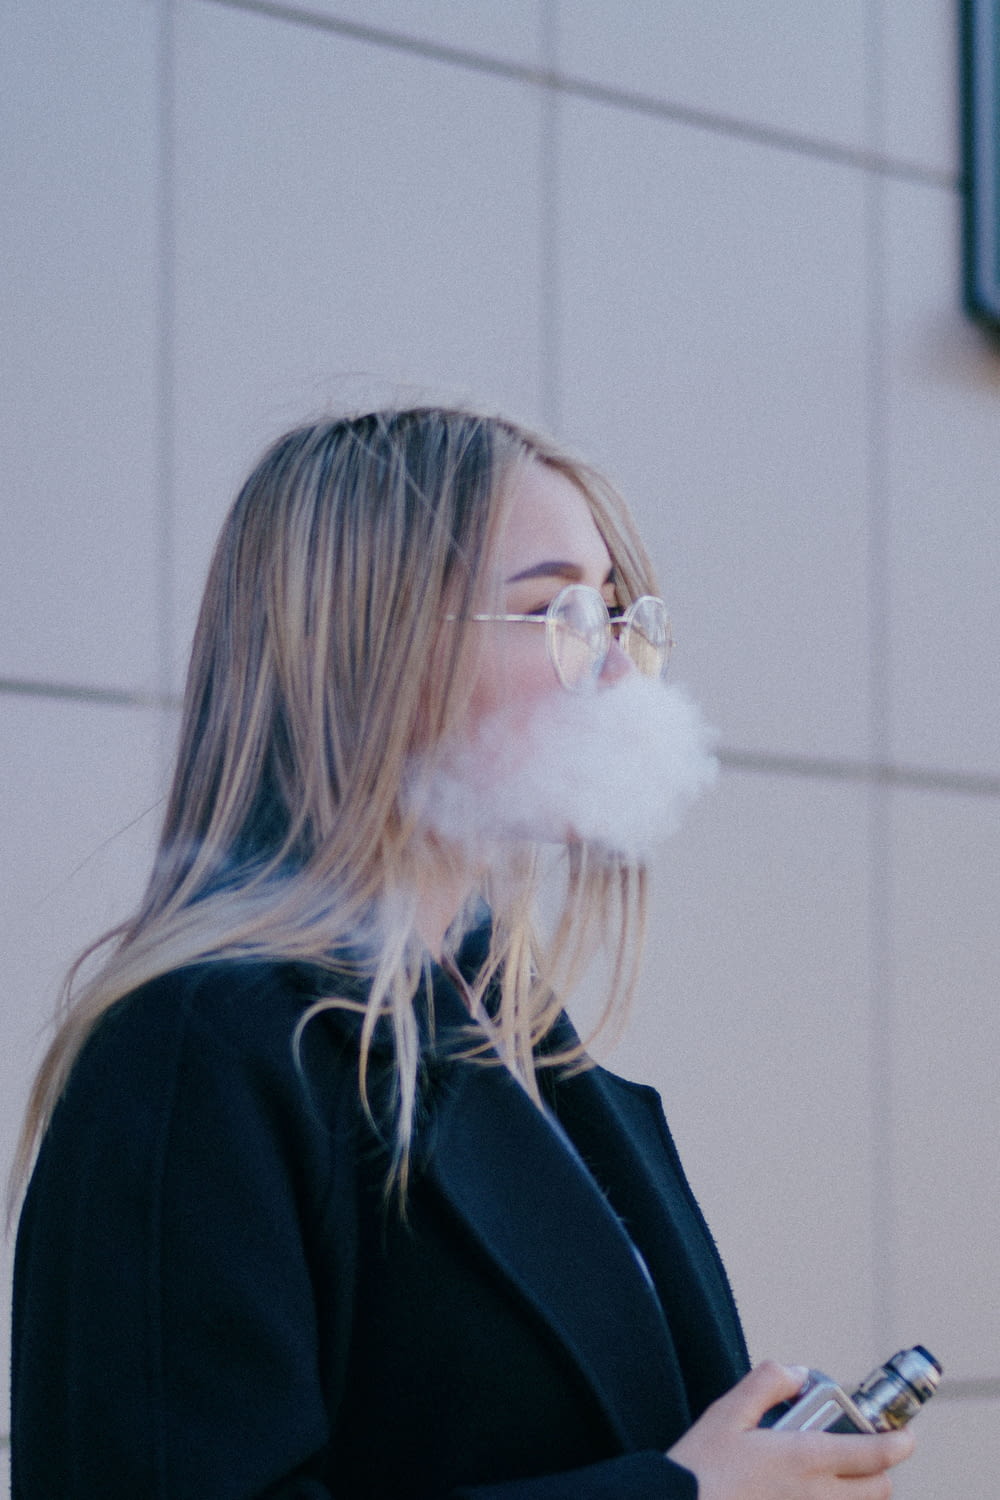 a woman smoking a cloud of smoke while holding a cell phone